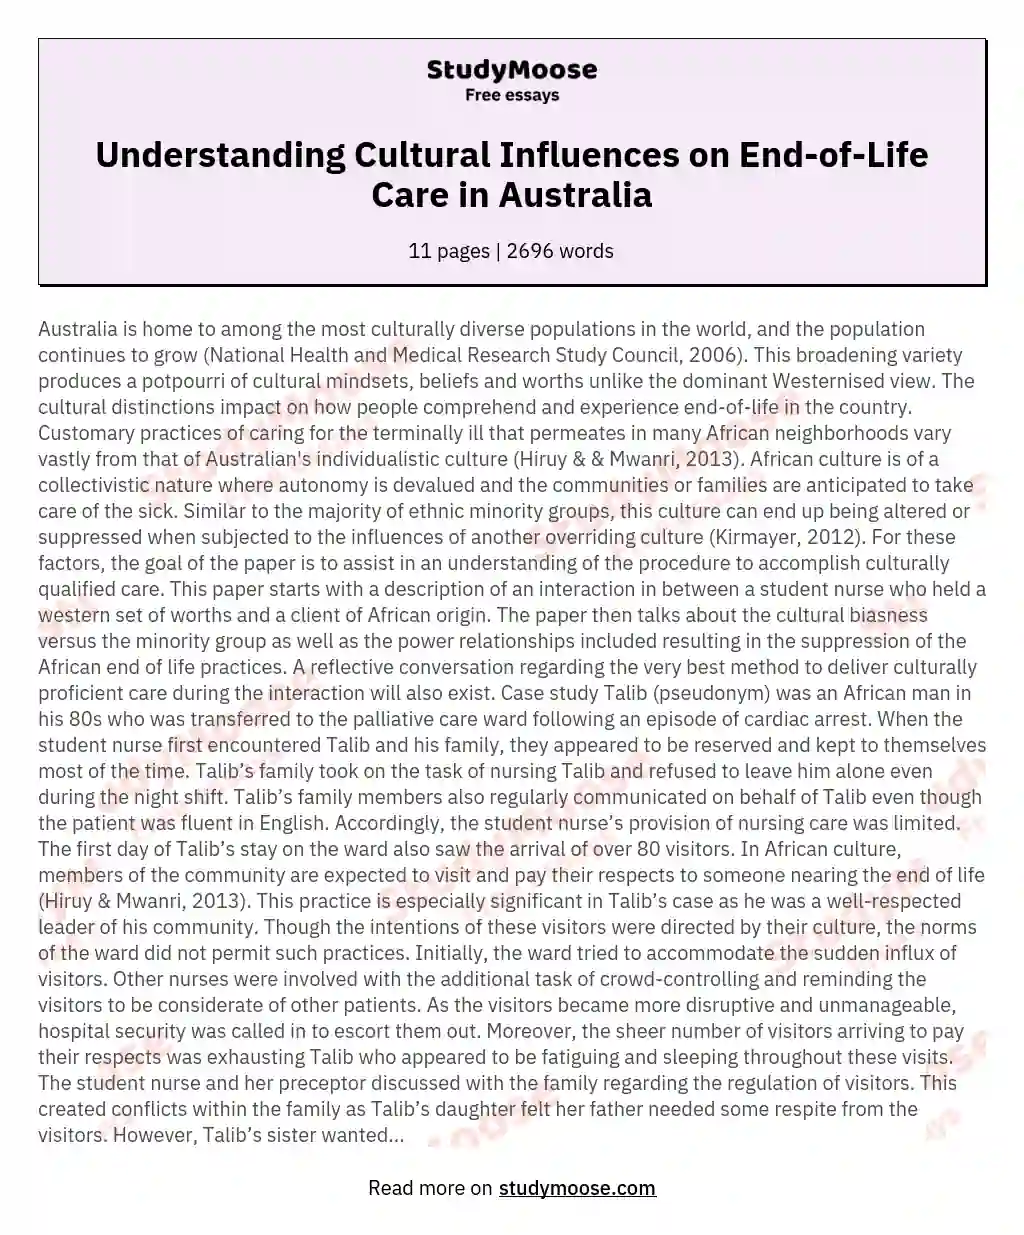 Understanding Cultural Influences on End-of-Life Care in Australia essay